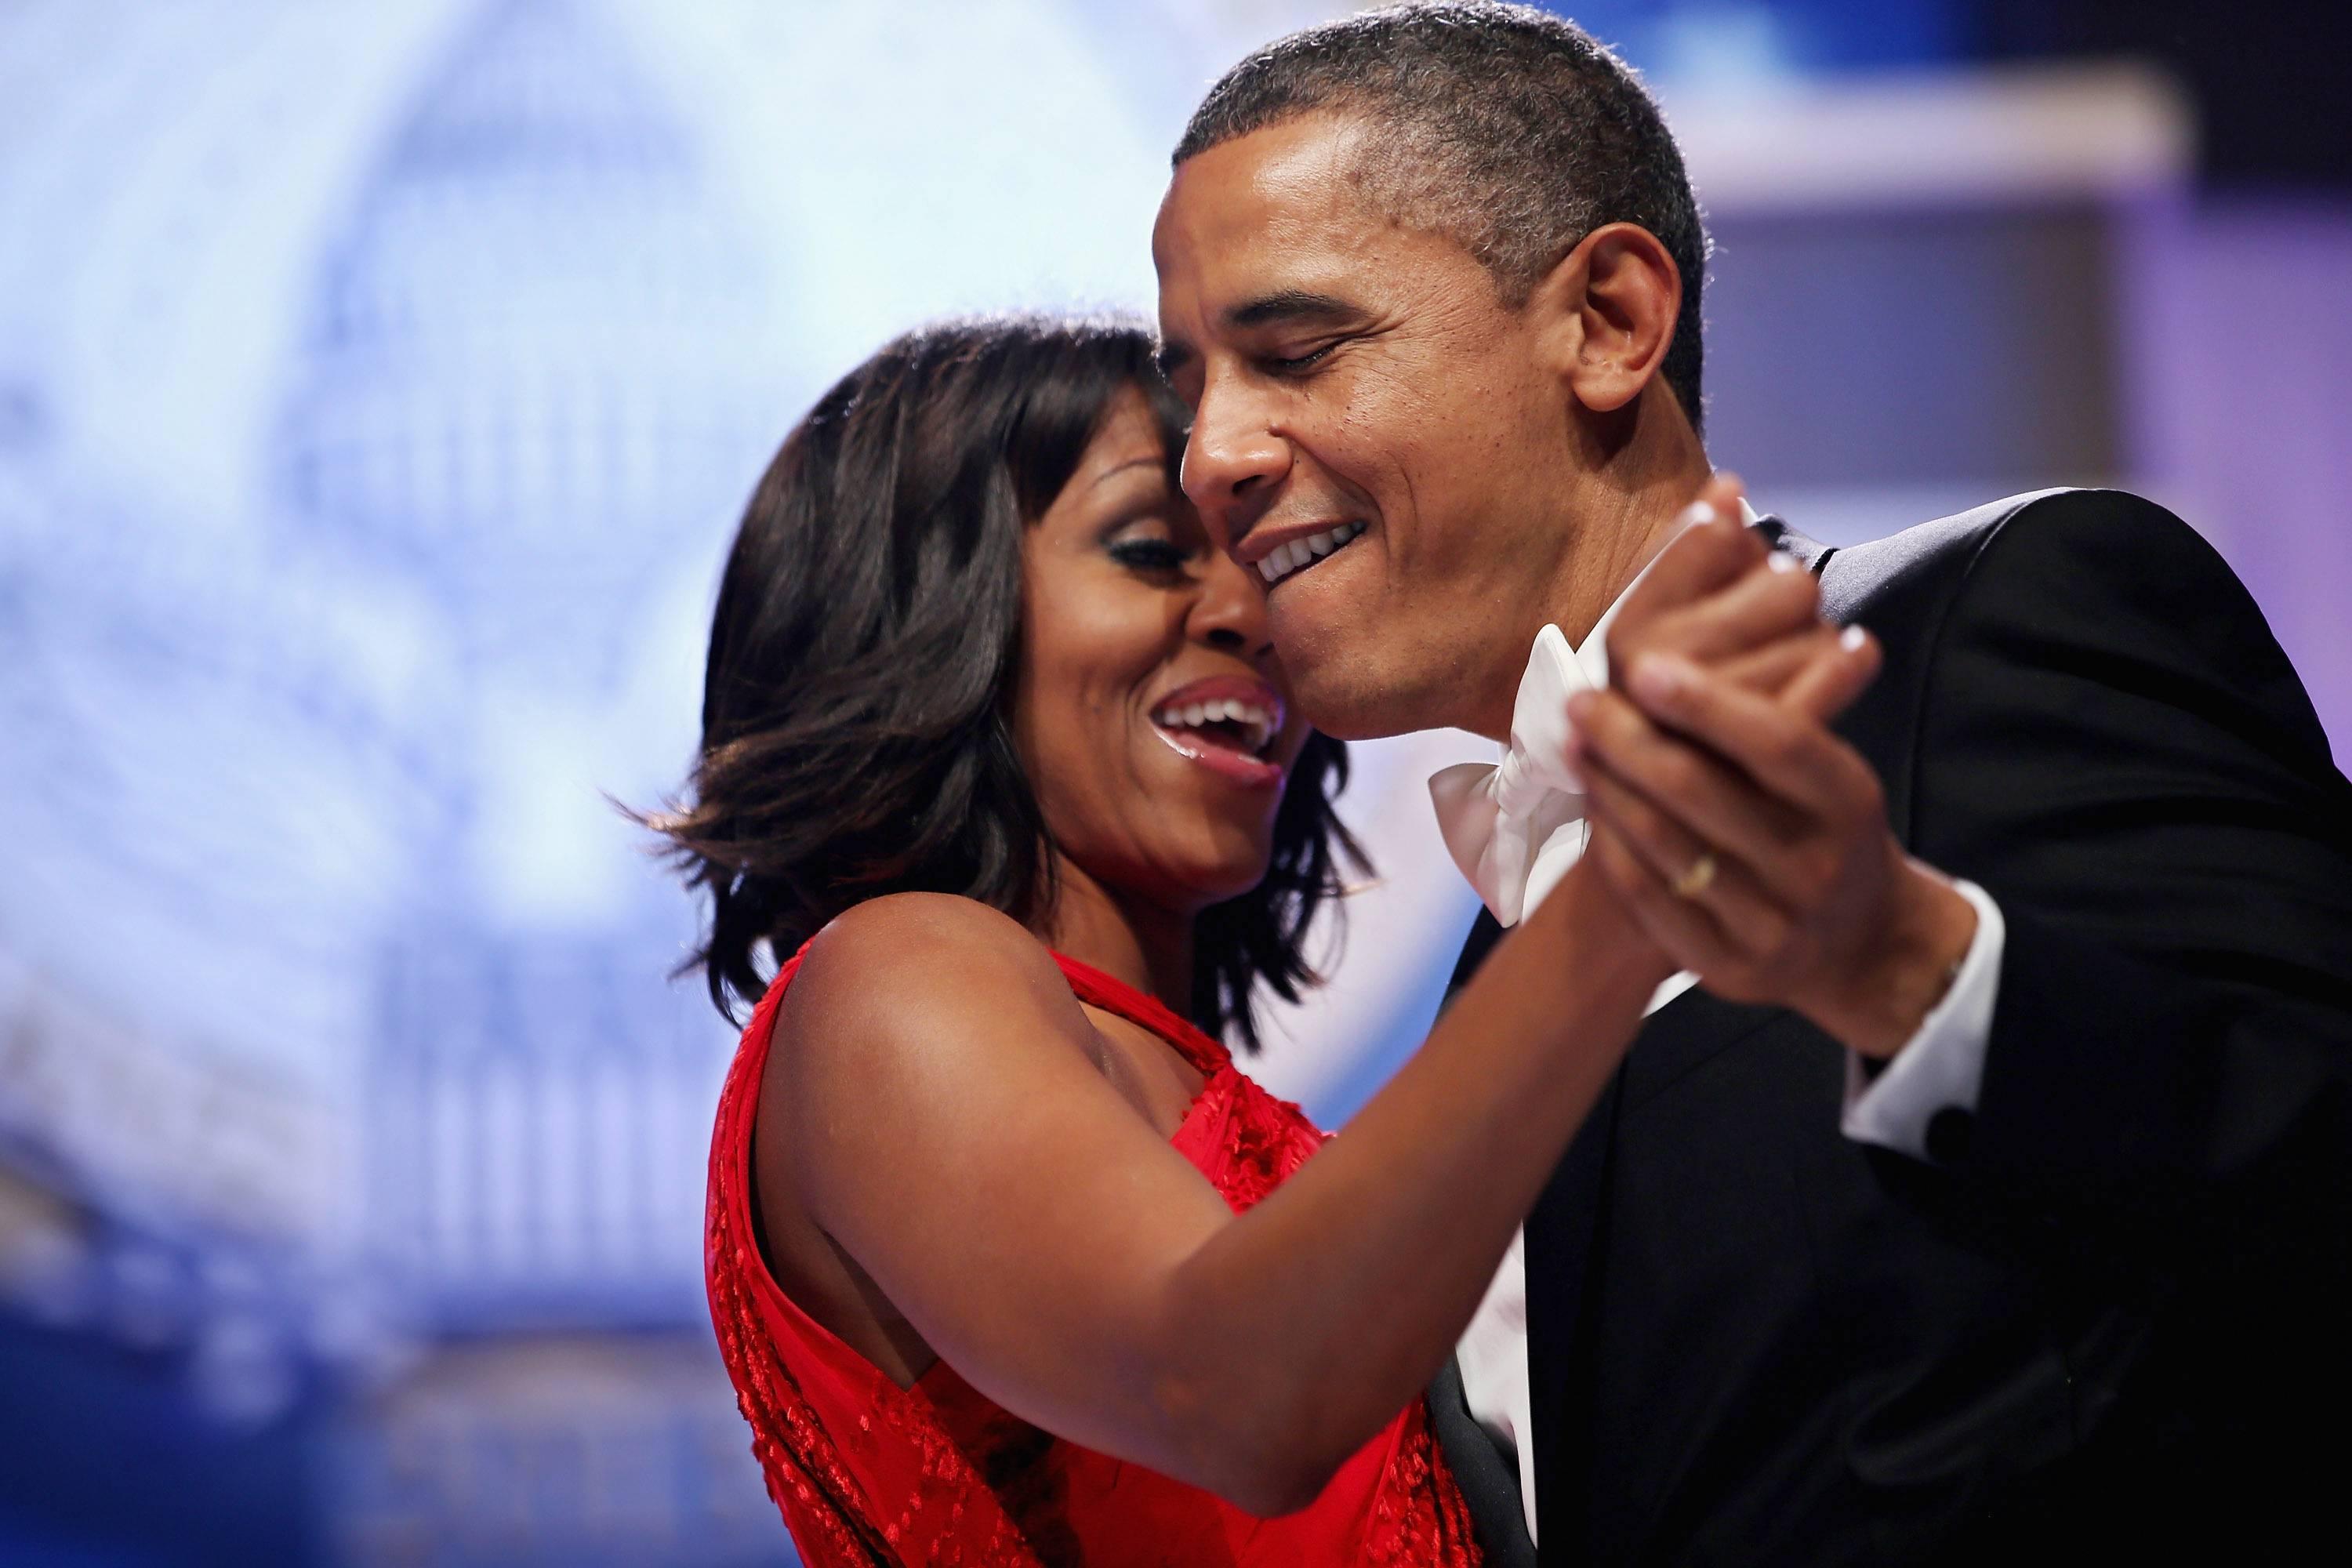 United States President Barack Obama and first lady Michelle Obama sing together as they dance during the Inaugural Ball at the Walter Washington Convention Center January 21, 2013 in Washington, DC. President Obama started his second term by taking the Oath of Office earlier in the day during a ceremony on the West Front of the U.S. Capitol. .Credit: Chip Somodevilla / Pool via CNP Reporters / DPA